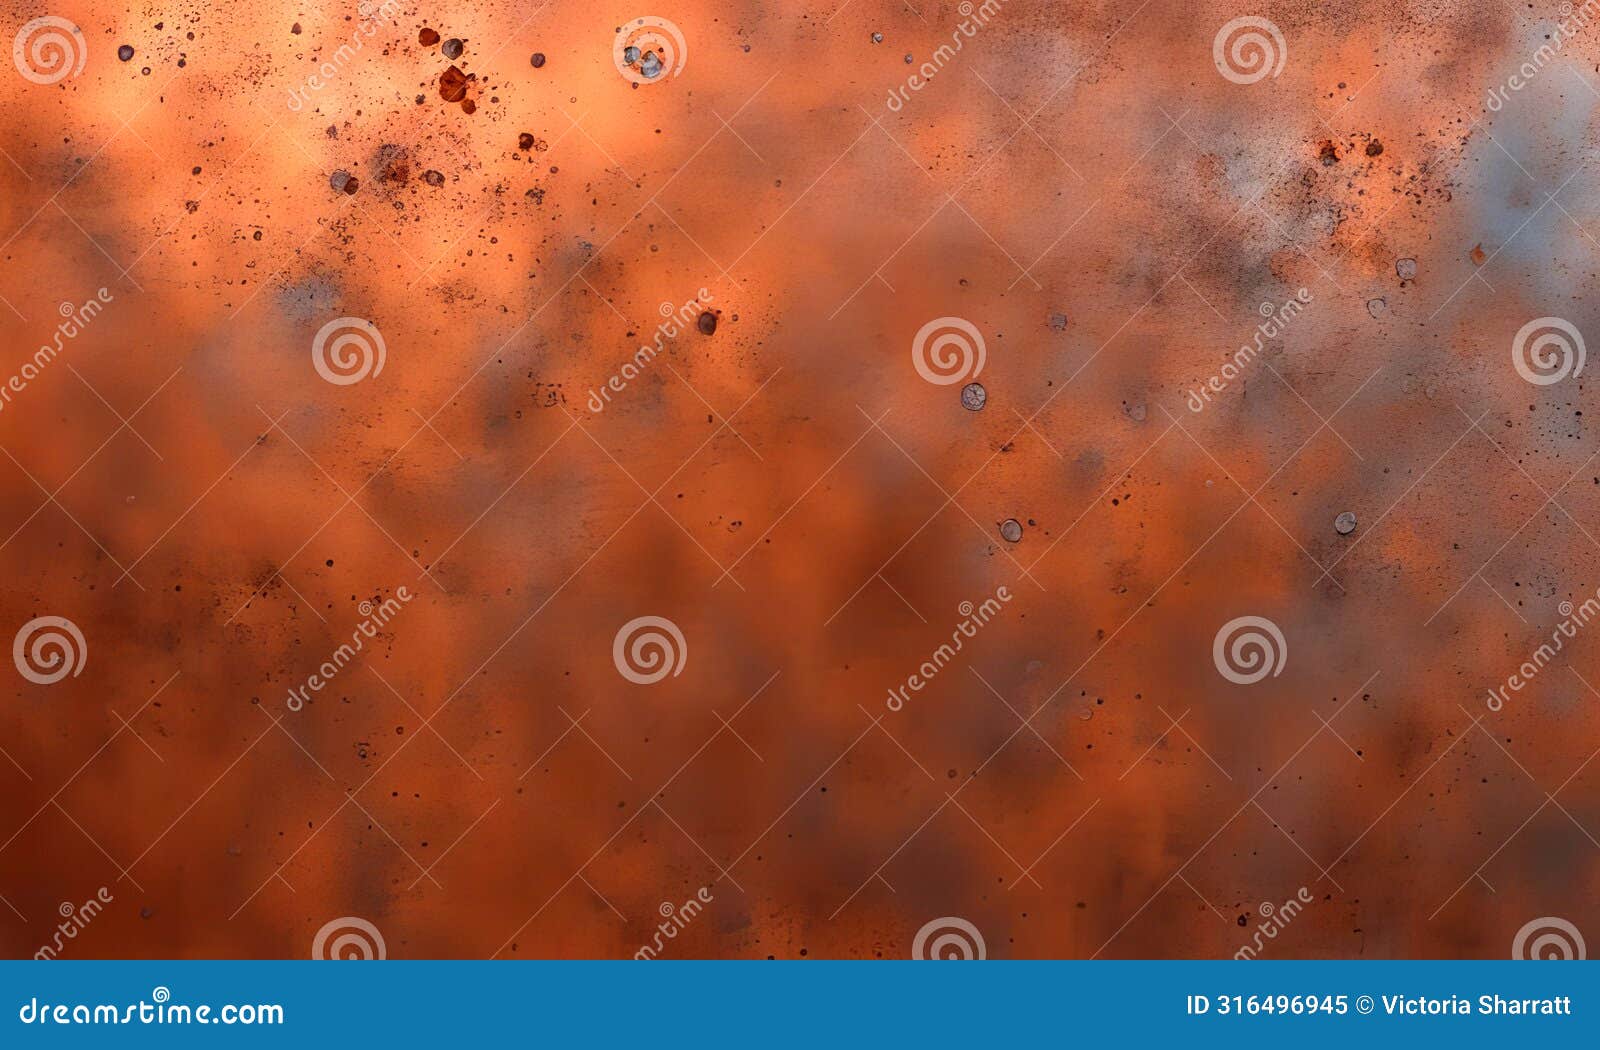 rusty copper metal background with spots oxidation